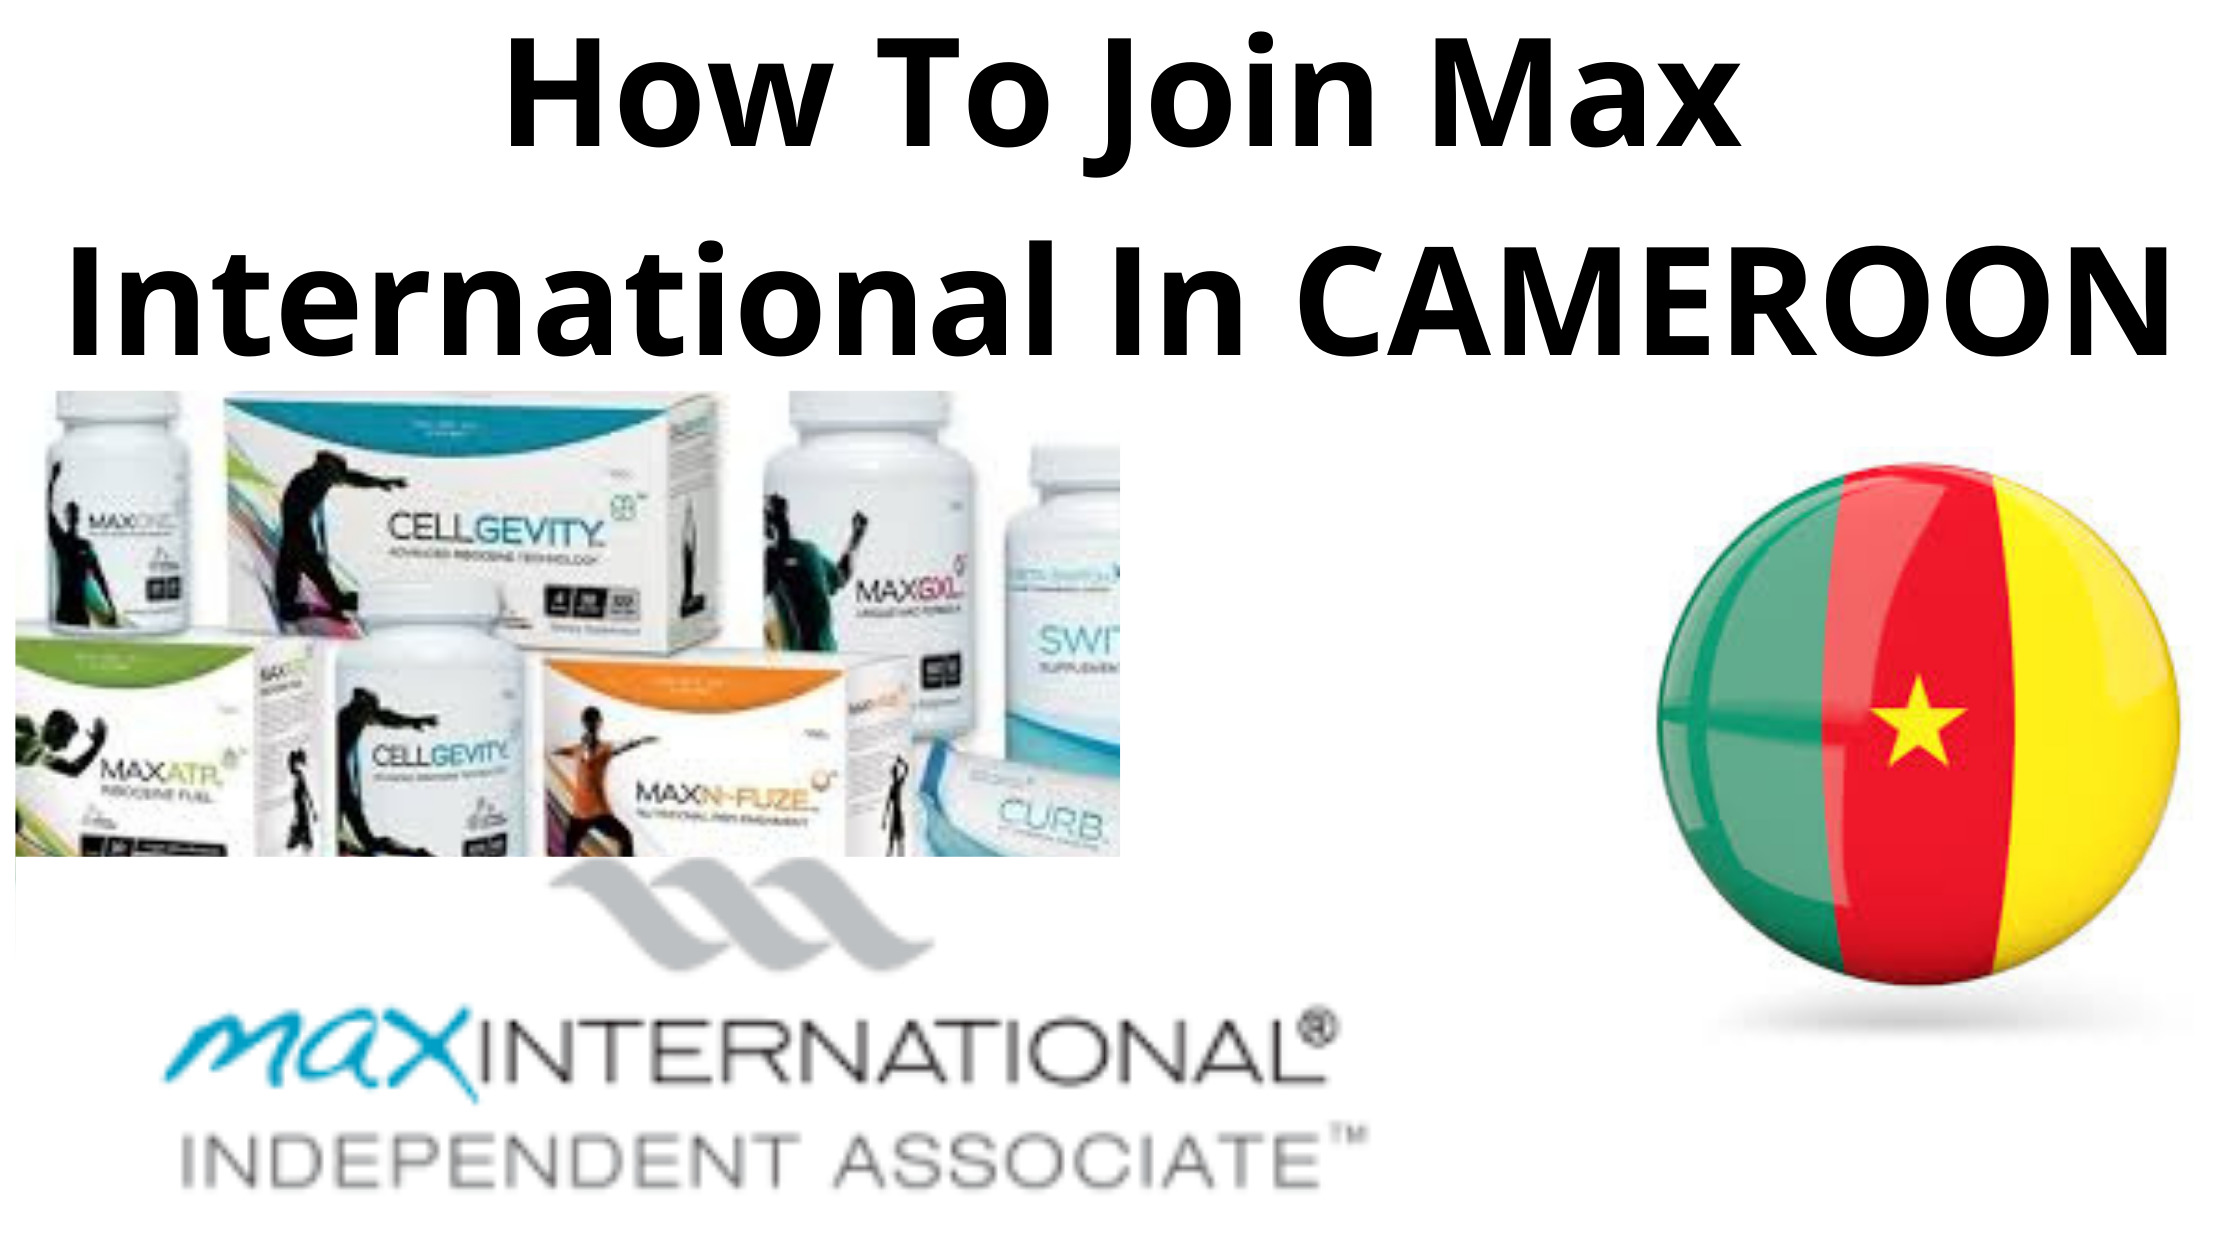 How to join max international in Cameroon